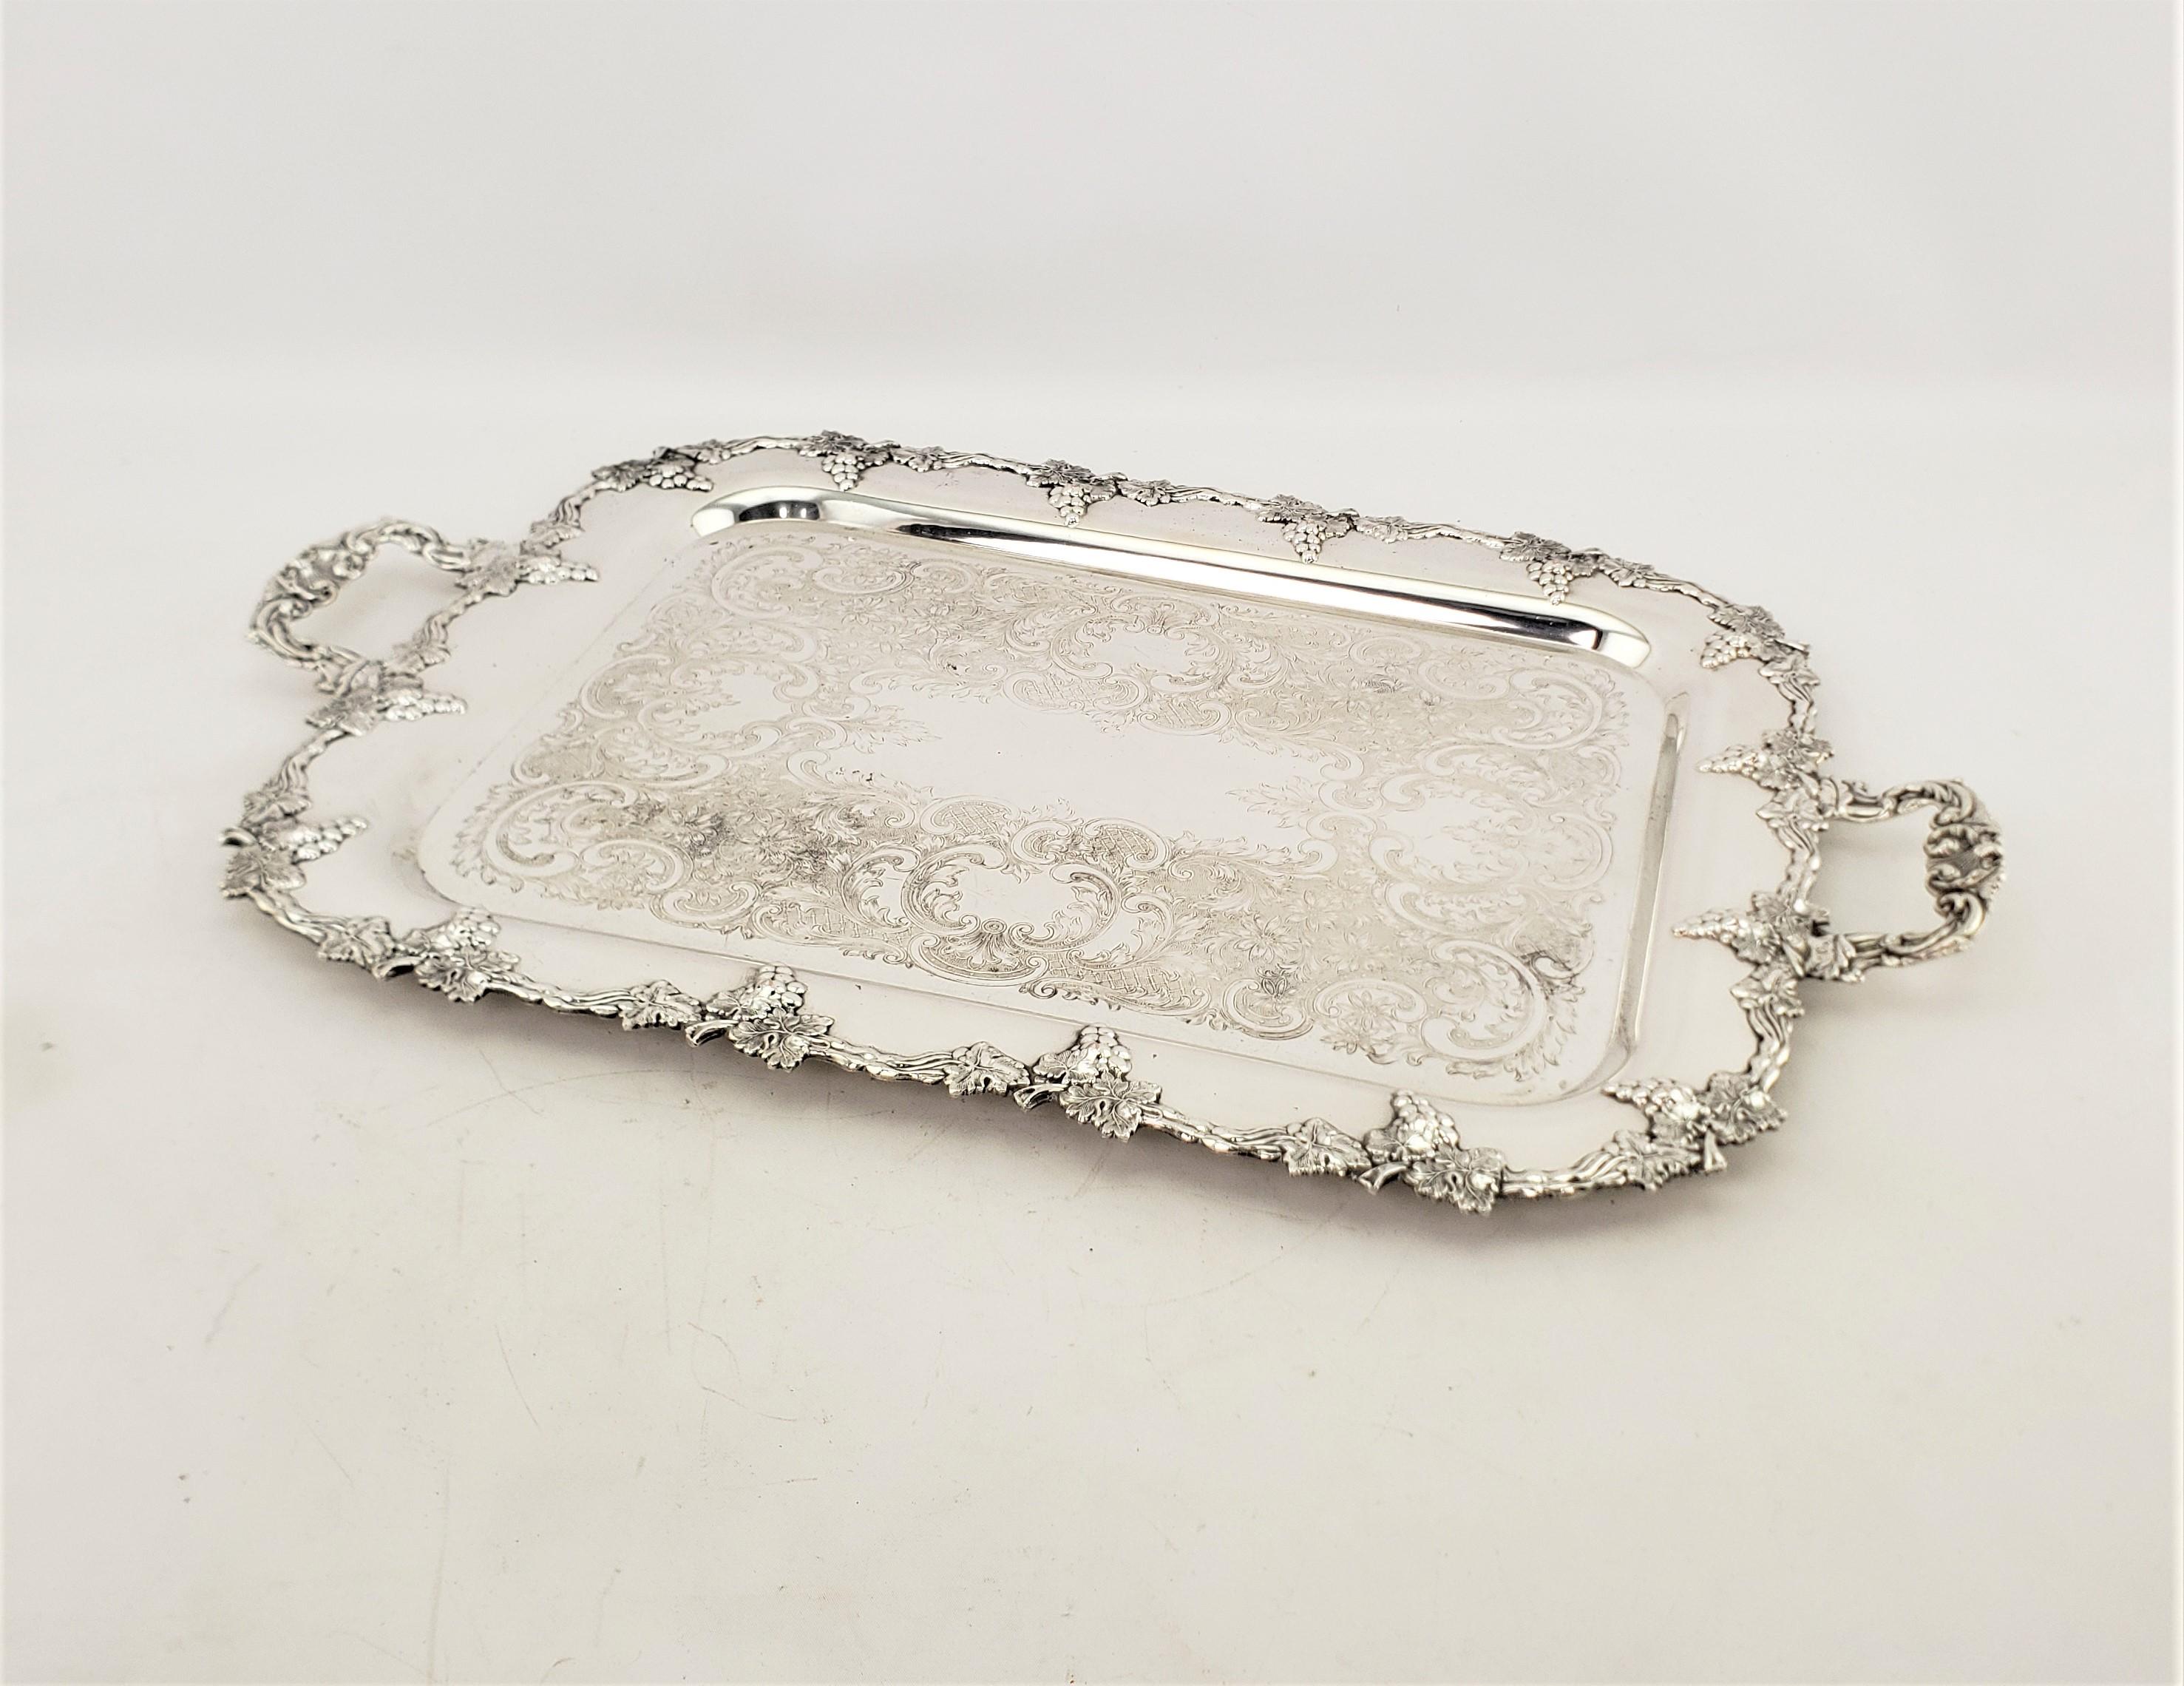 This antique serving tray was made by an unkwown maker and presumed to have originated from England and date to approximately 1920 and done in a Victorian style. The tray is done in silver plate and has applied grape and leaf decoration around the